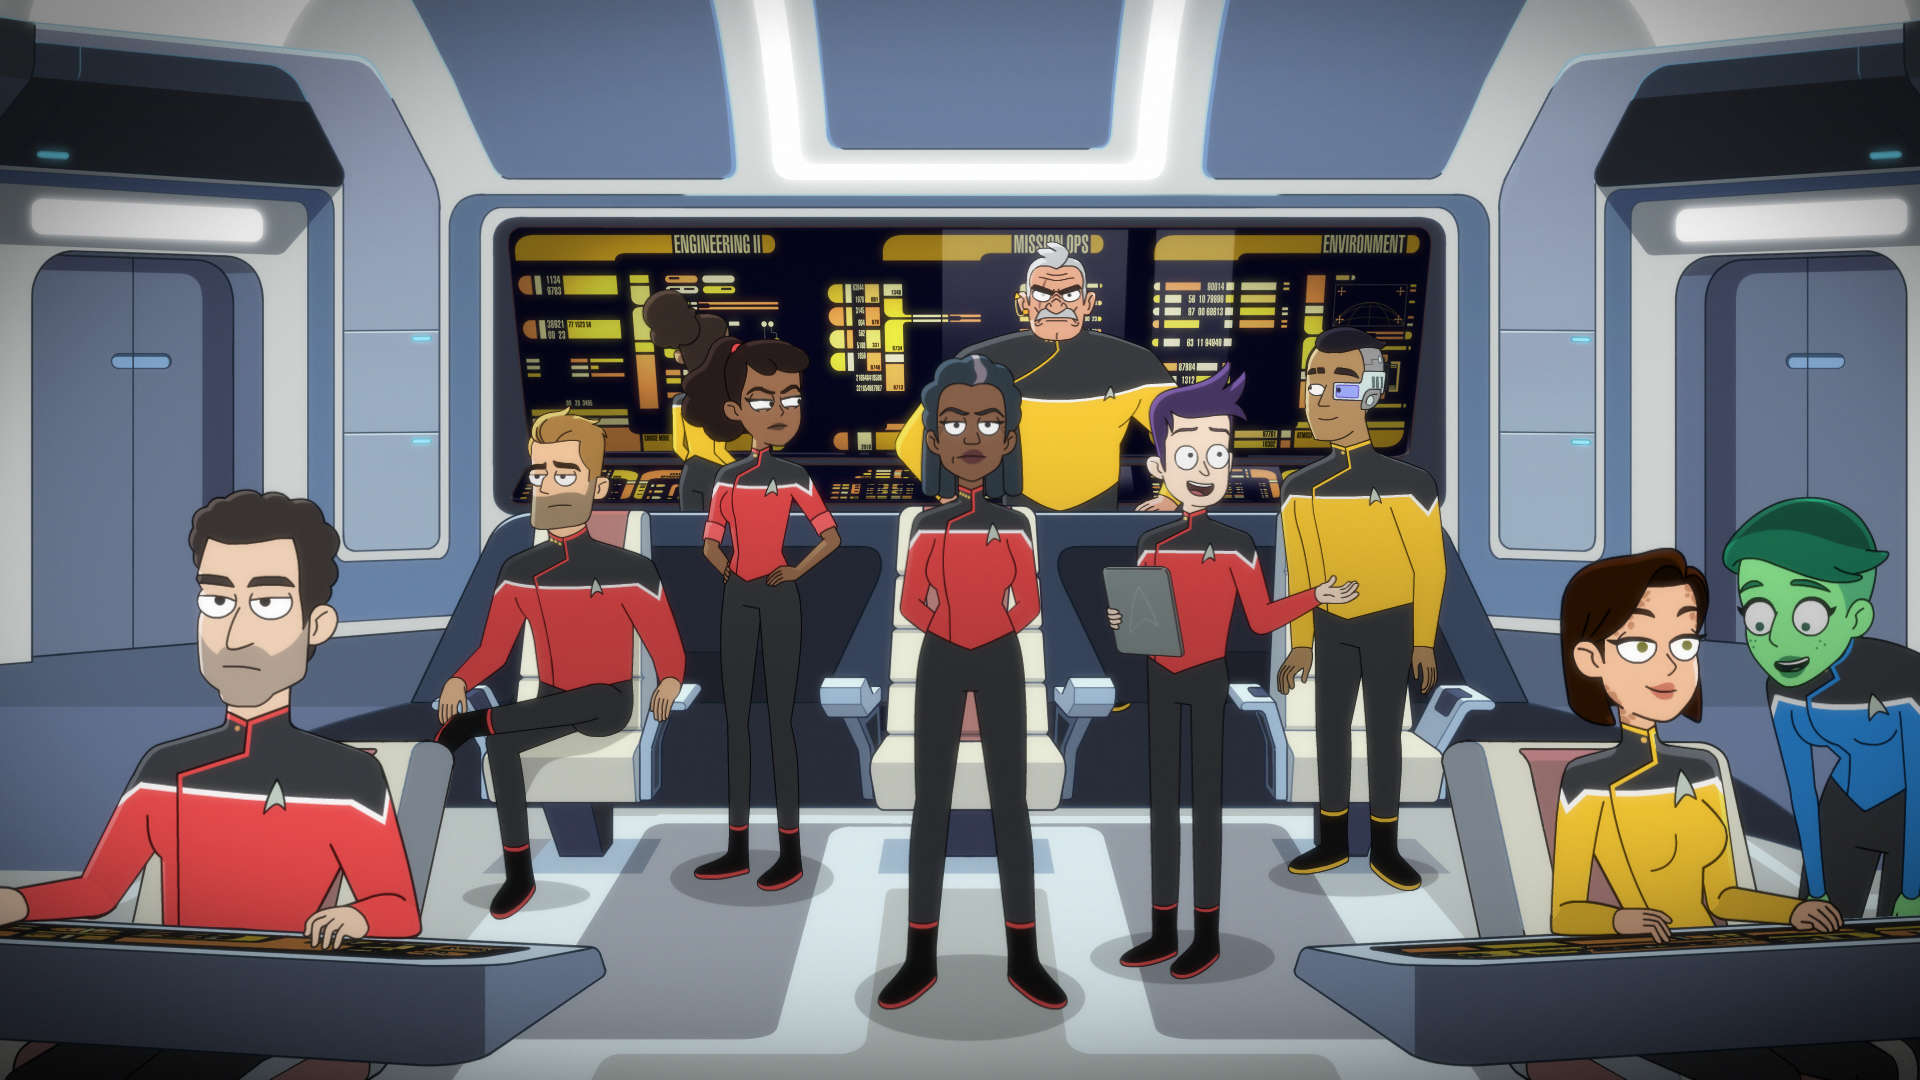 Star Trek: Lower Decks creator Mike McMahan on S2 finale and what's next